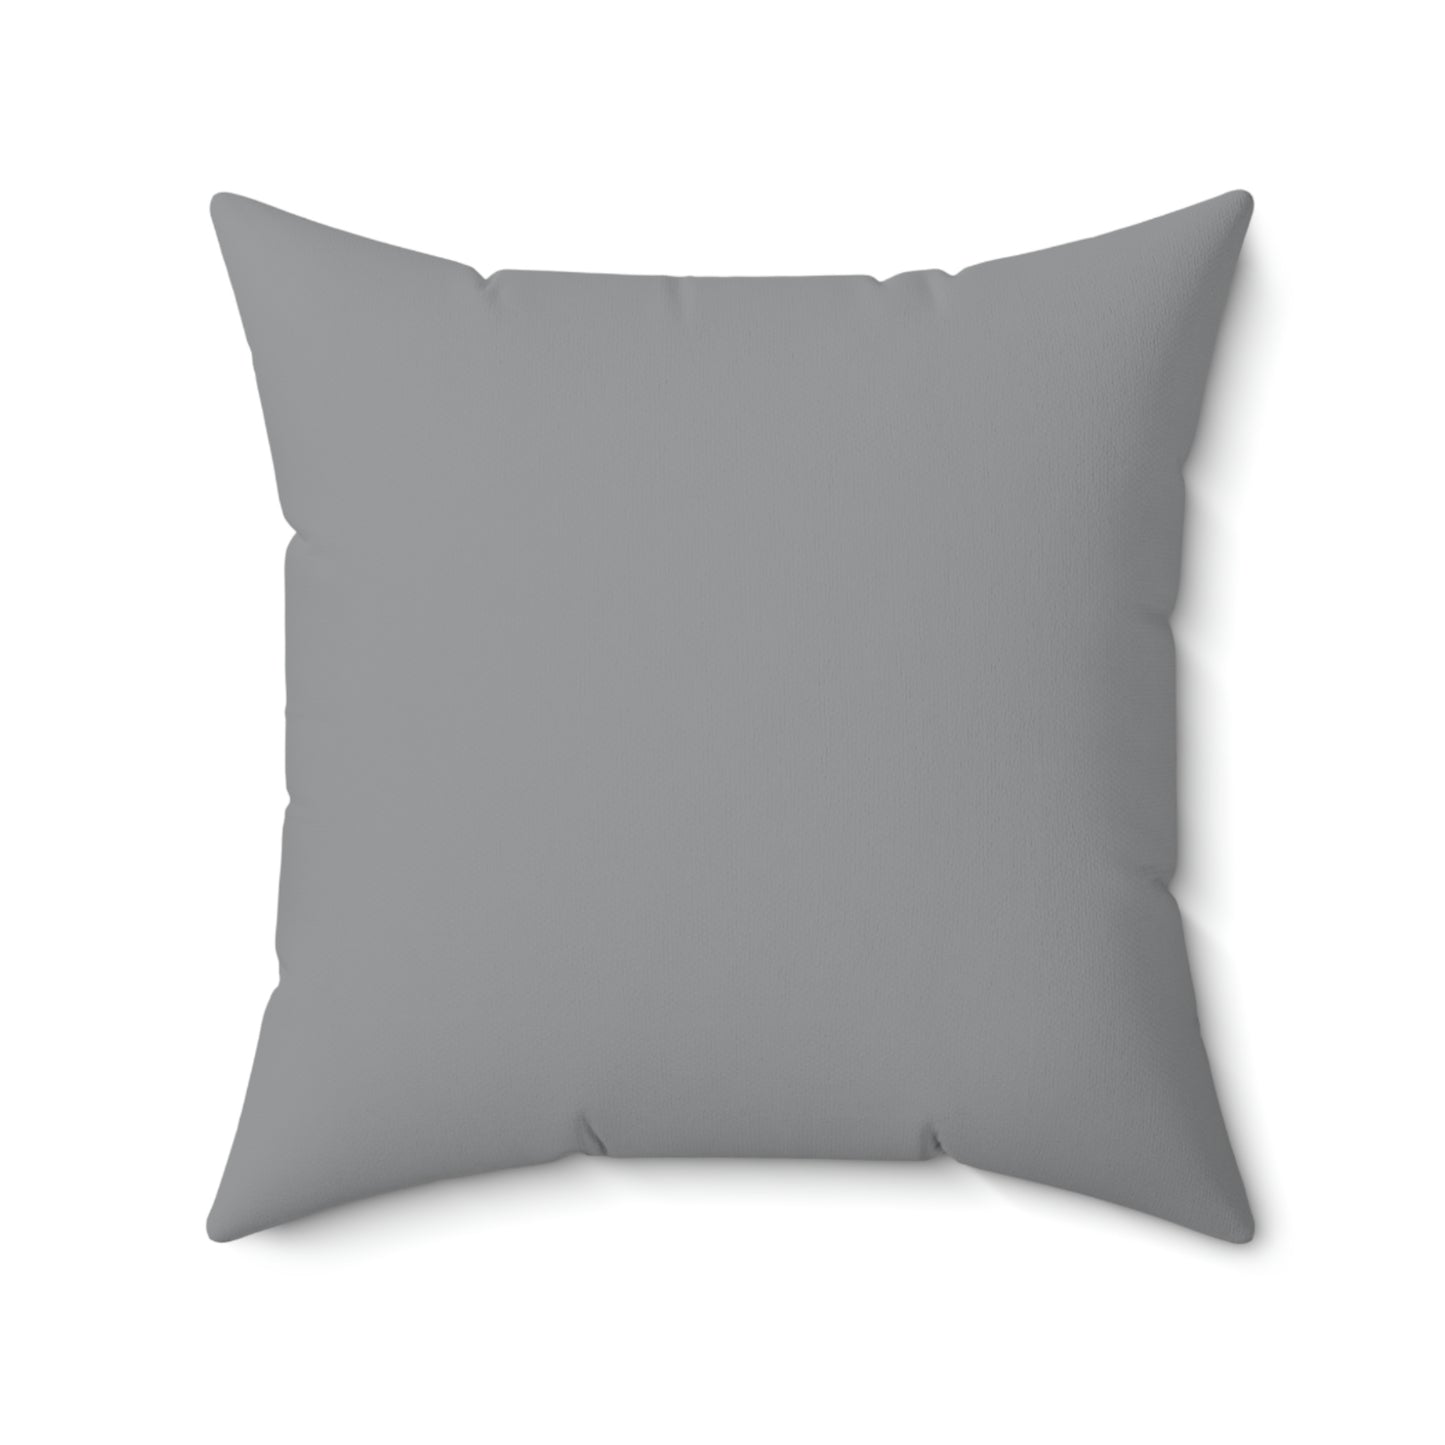 Spun Polyester Square Pillow Case "Cassettes on Gray”